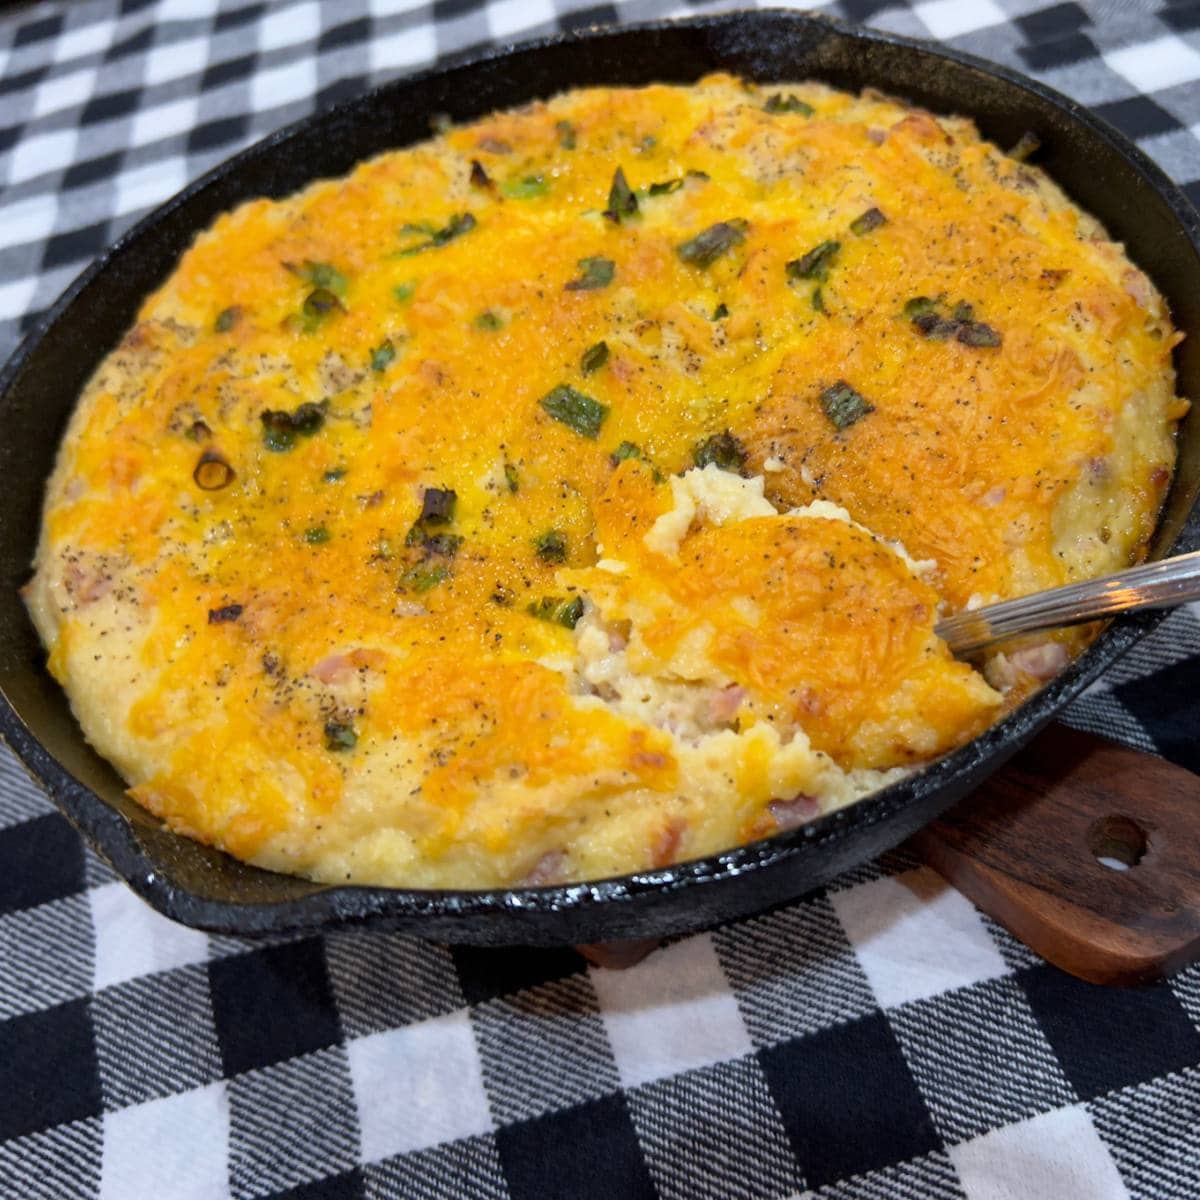 Shout-out to Plain Chicken Food Blog and Their Cheesy Grits!